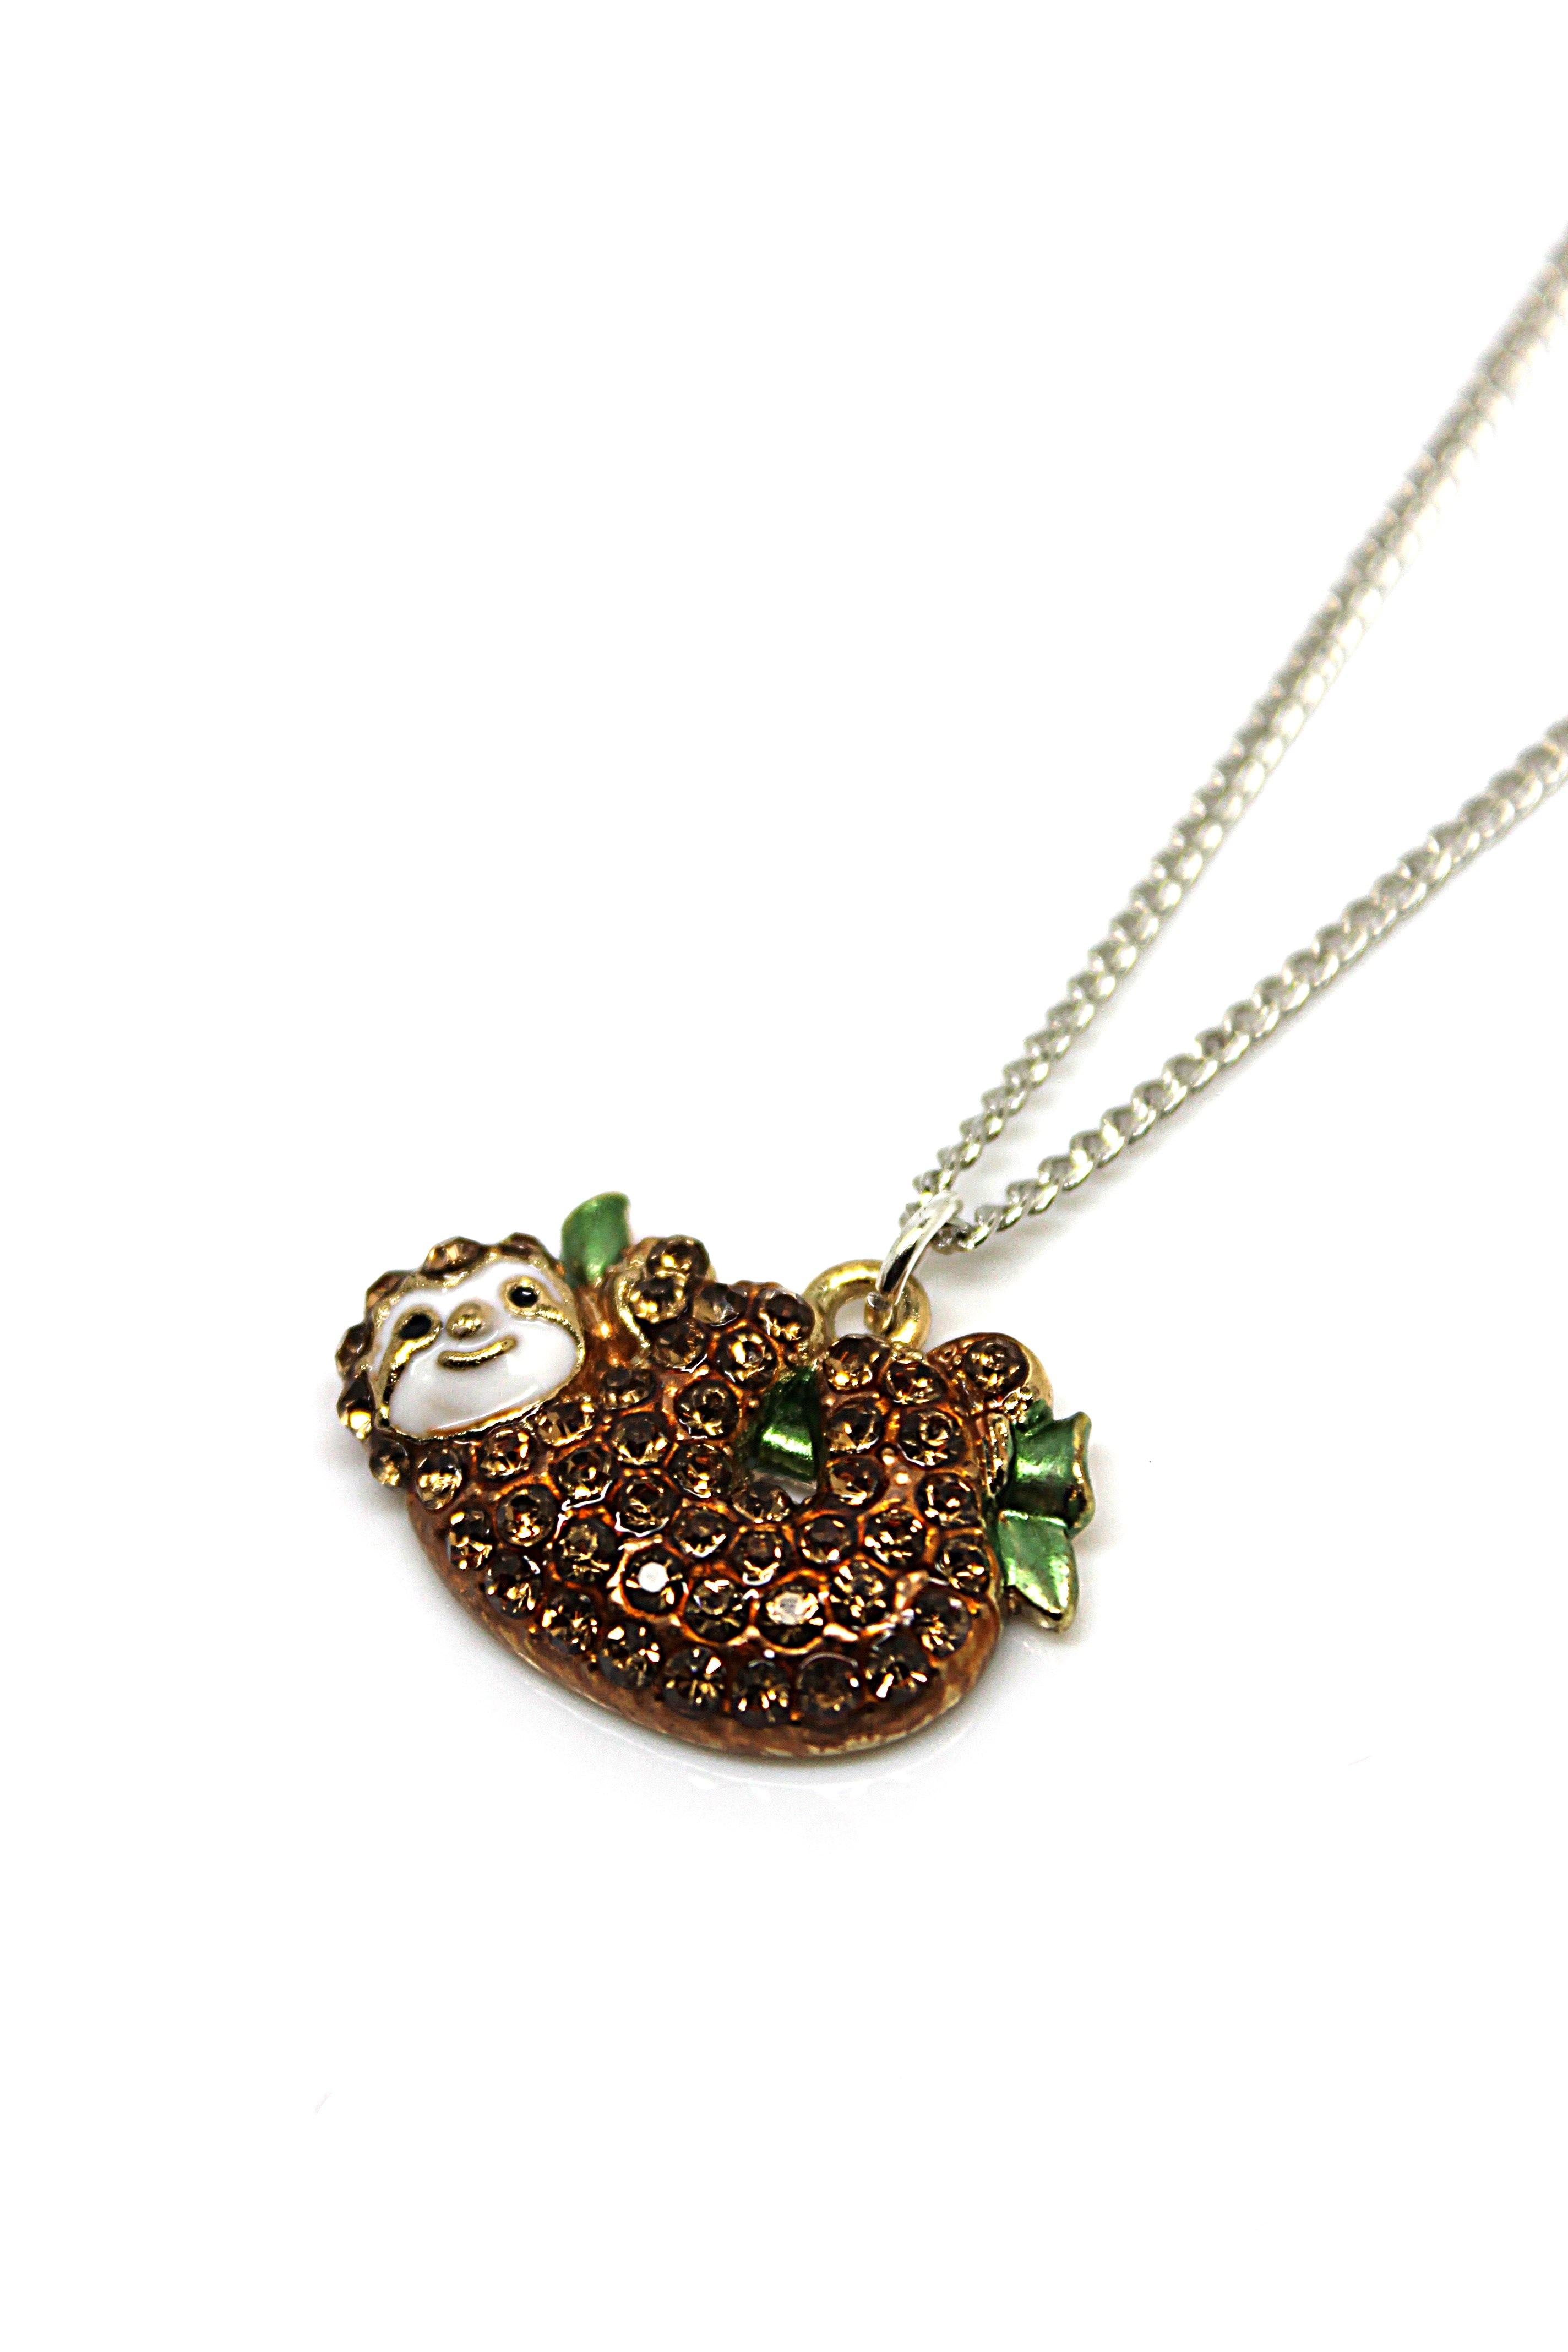 Sloth Necklace - Wildtouch - Wildtouch